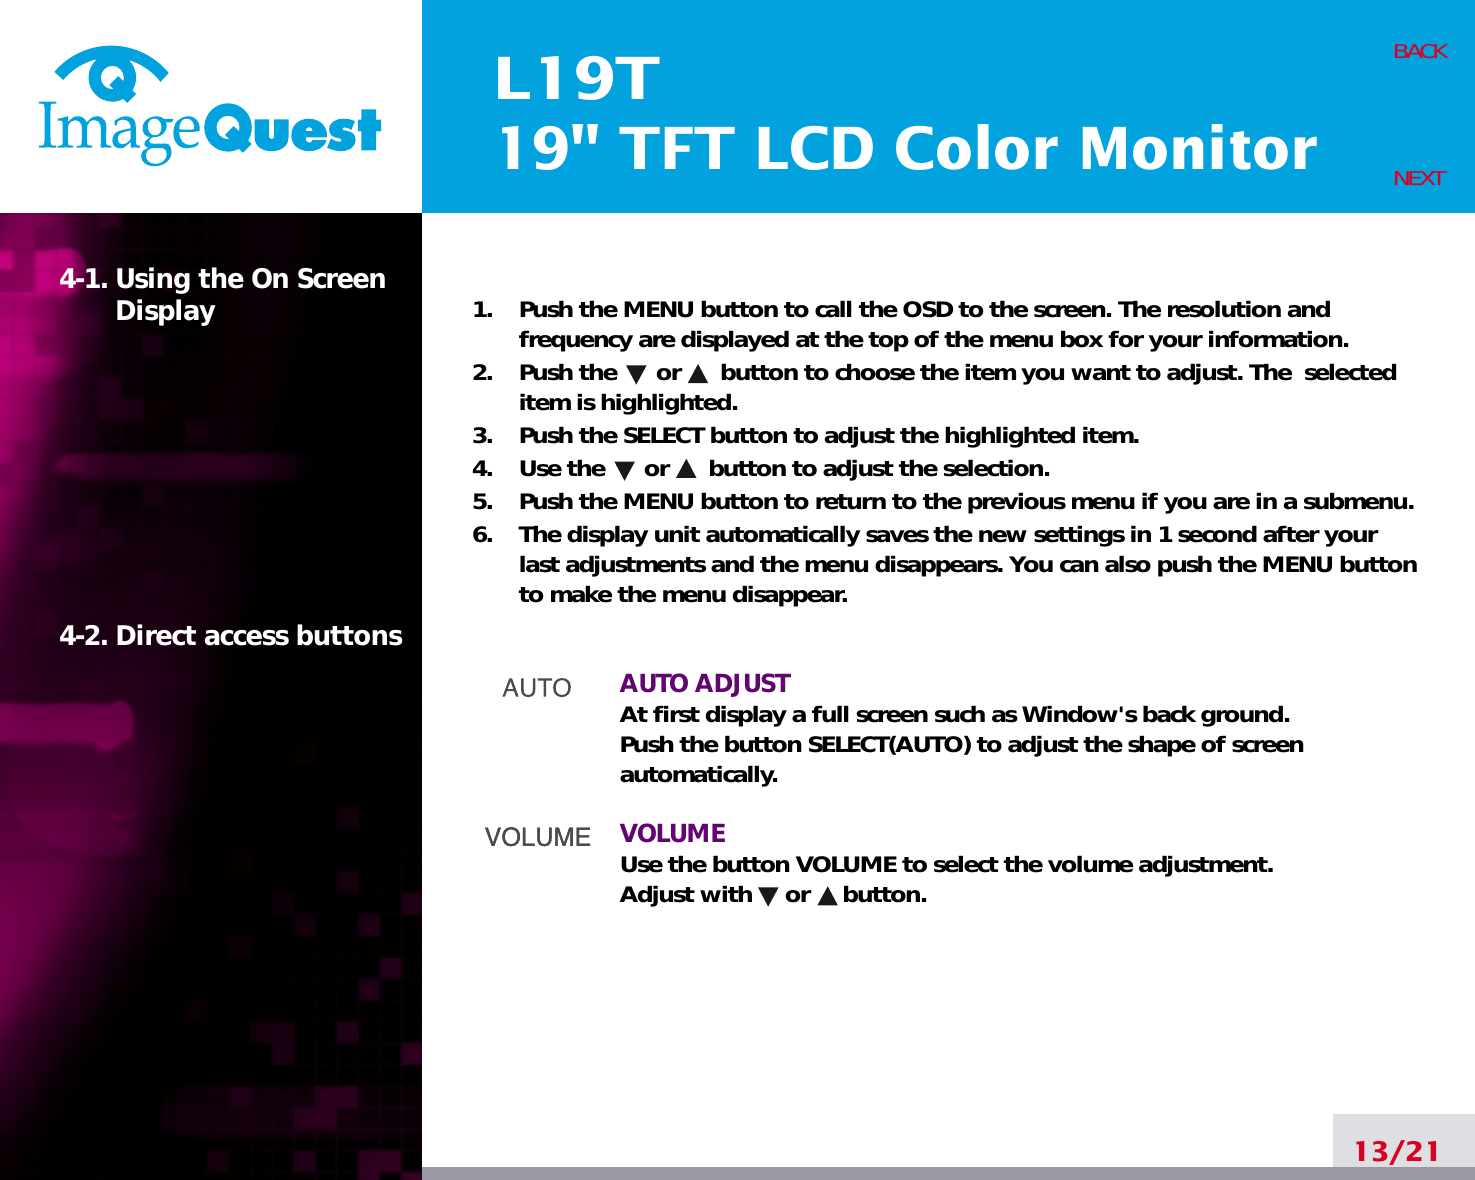 L19T19&quot; TFT LCD Color Monitor13/21BACKNEXT1.    Push the MENU button to call the OSD to the screen. The resolution andfrequency are displayed at the top of the menu box for your information.2.    Push the      or      button to choose the item you want to adjust. The  selecteditem is highlighted.3.    Push the SELECT button to adjust the highlighted item. 4.    Use the      or      button to adjust the selection.5.    Push the MENU button to return to the previous menu if you are in a submenu.6.    The display unit automatically saves the new settings in 1 second after yourlast adjustments and the menu disappears. You can also push the MENU buttonto make the menu disappear.AUTO ADJUSTAt first display a full screen such as Window&apos;s back ground.Push the button SELECT(AUTO) to adjust the shape of screenautomatically.VOLUMEUse the button VOLUME to select the volume adjustment.Adjust with     or     button.4-1. Using the On ScreenDisplay 4-2. Direct access buttons